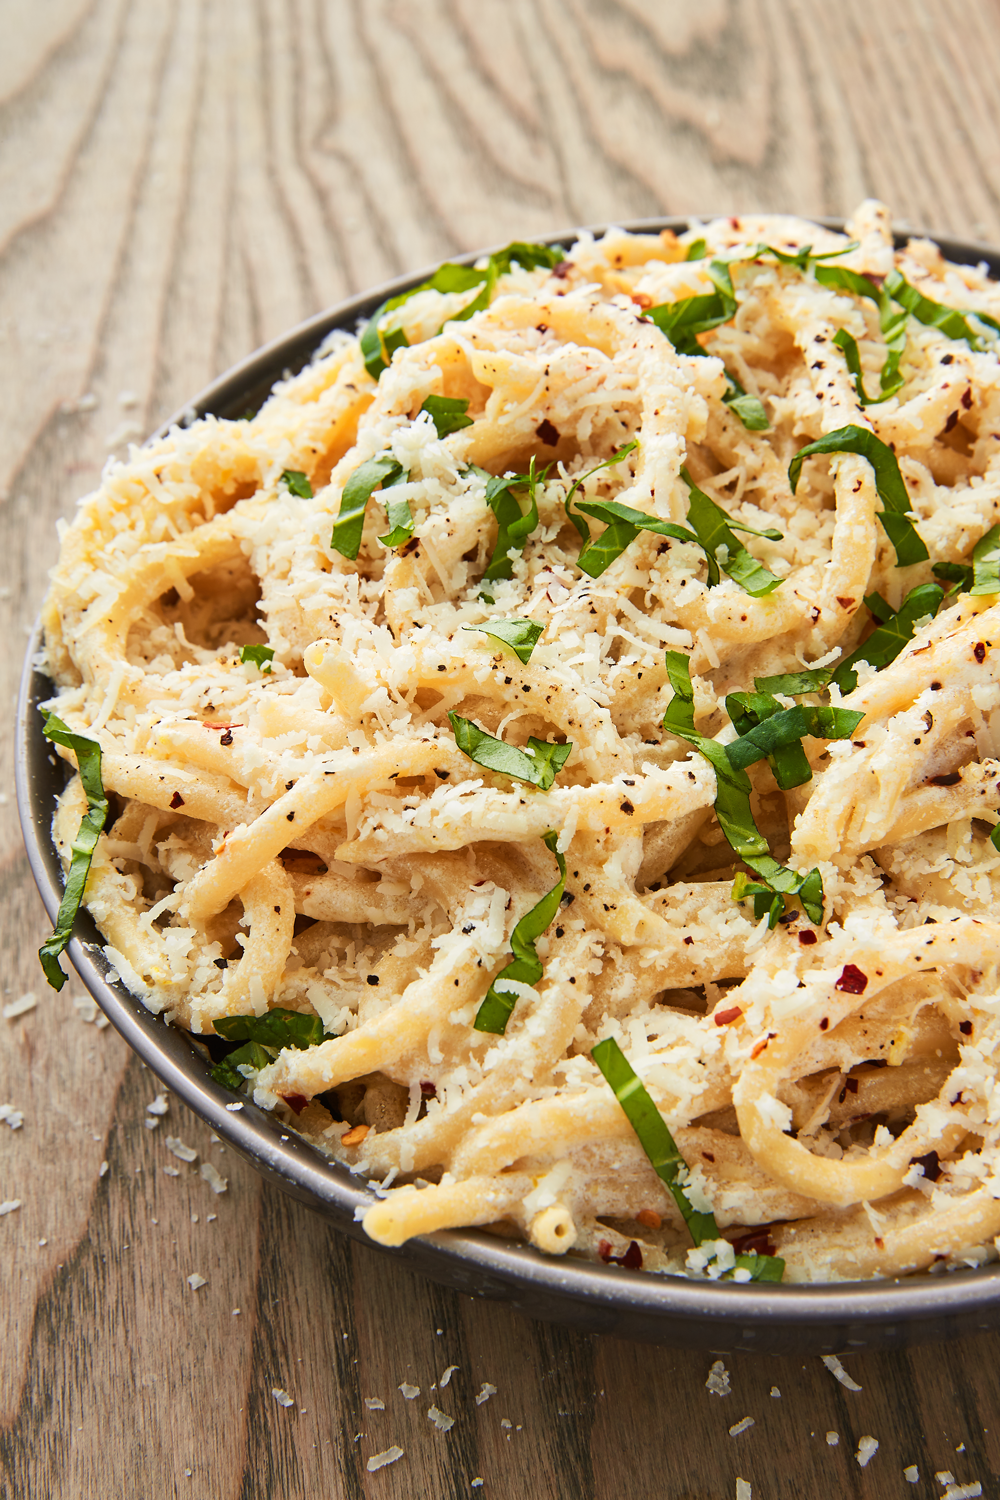 20+ Best Cheesy Pasta Recipes - Pasta with Cheese—